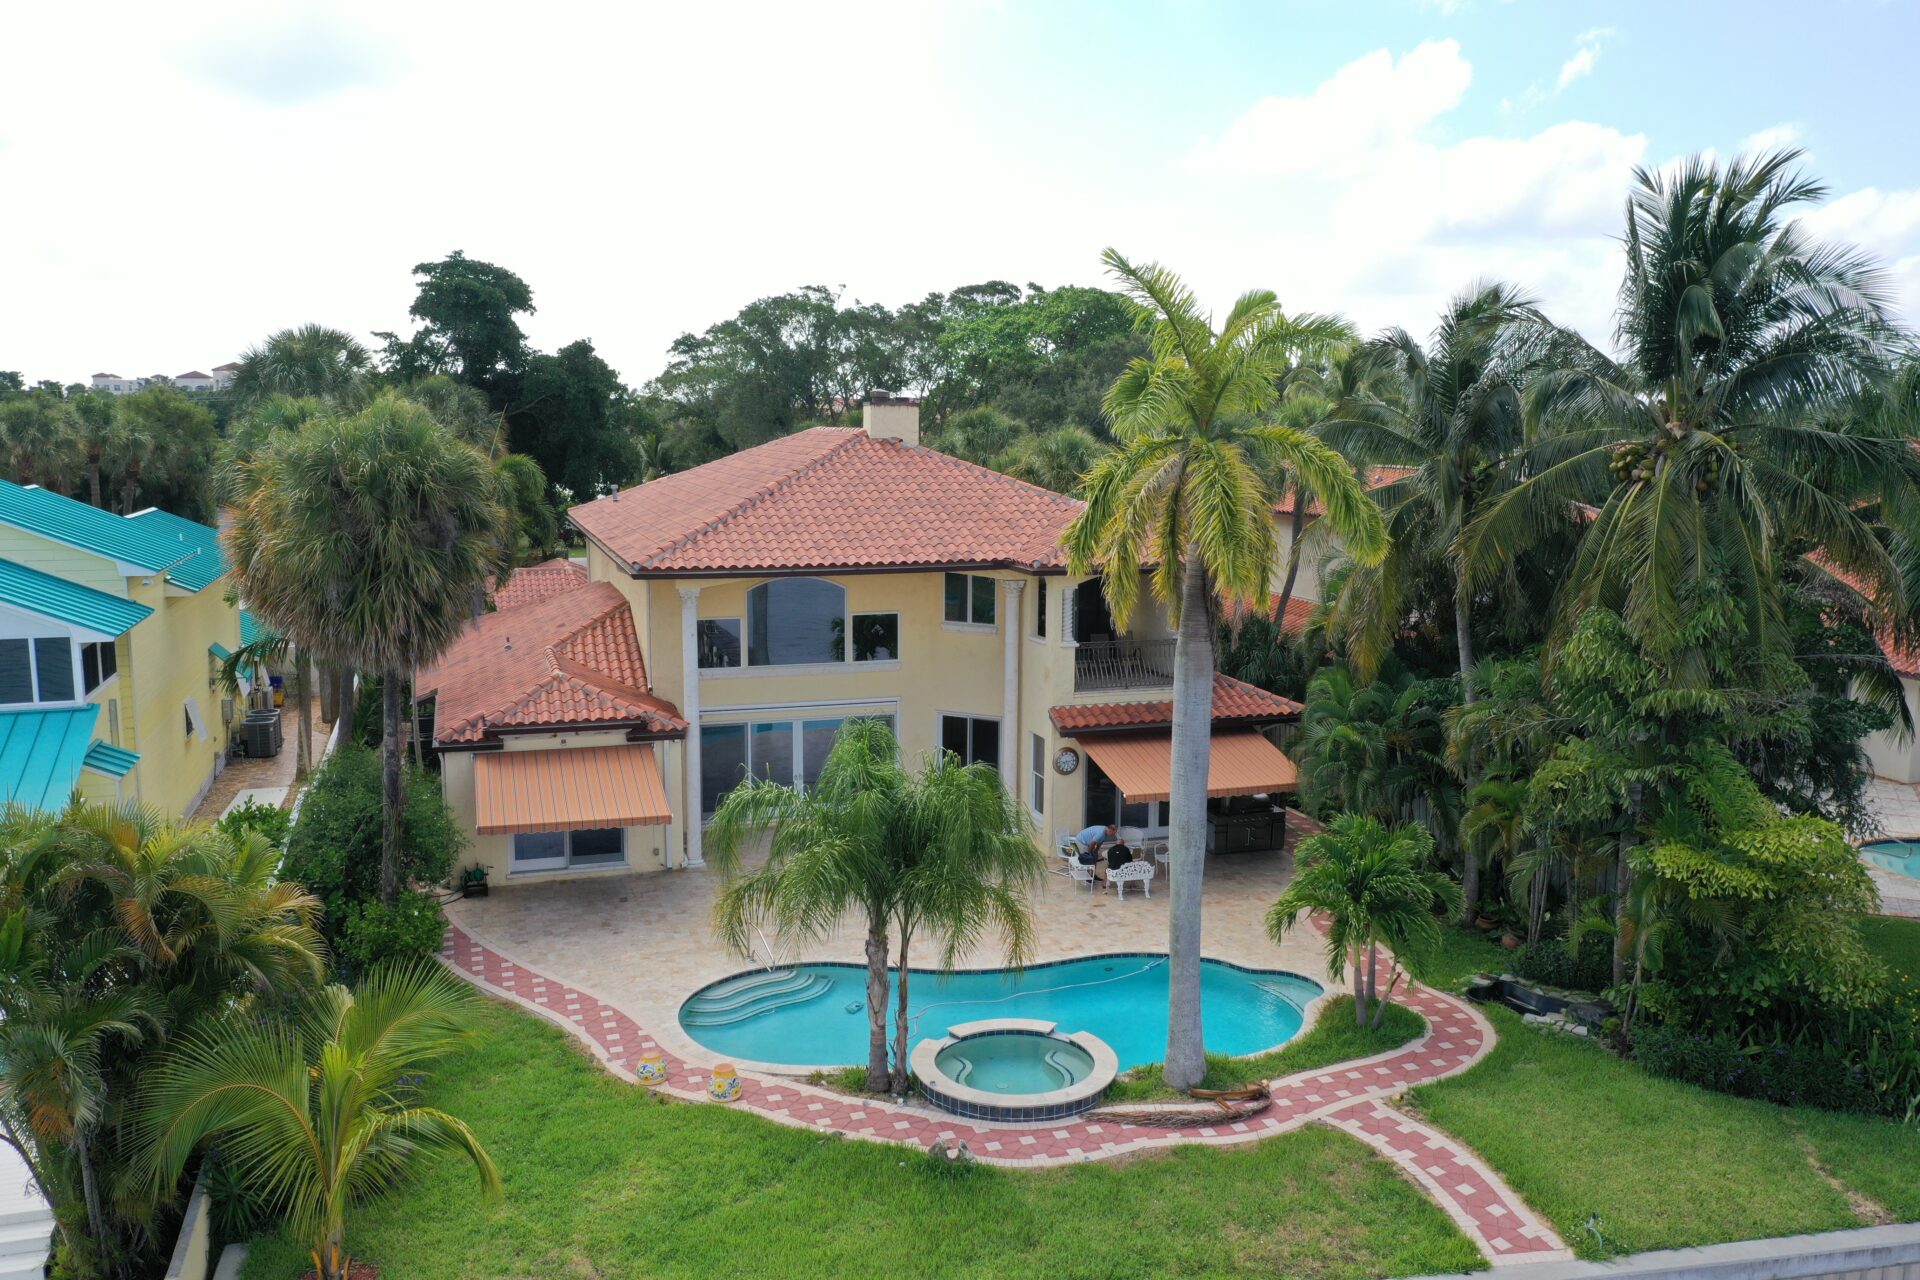 A large house with palm trees and a pool.